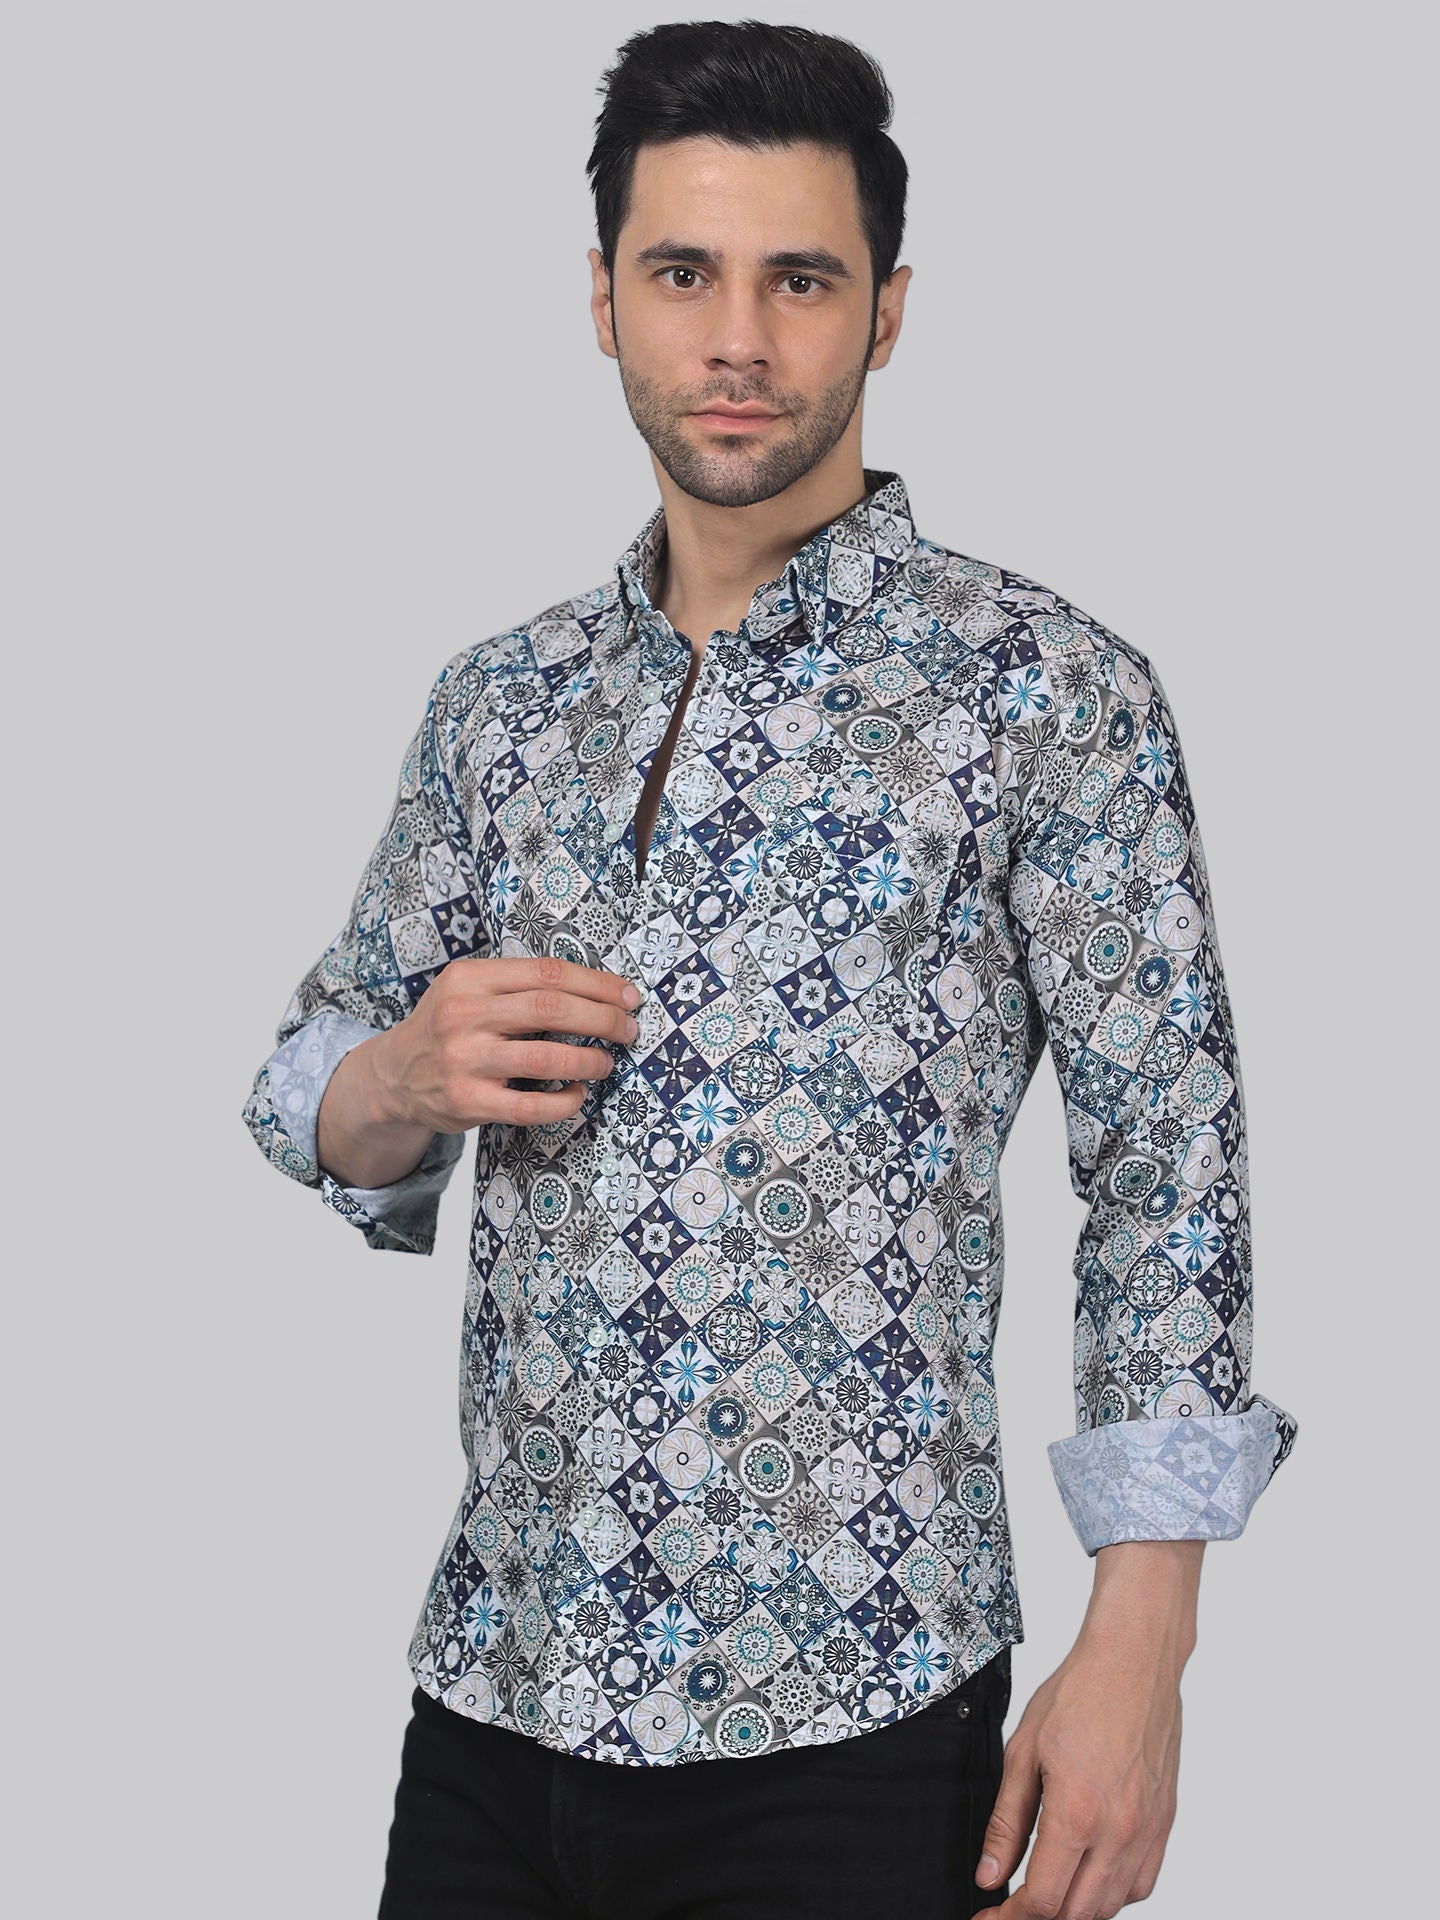 TryBuy Men's Printed Full Sleeve Casual Linen Shirt - Add Some Pop to Your Outfit! - TryBuy® USA🇺🇸